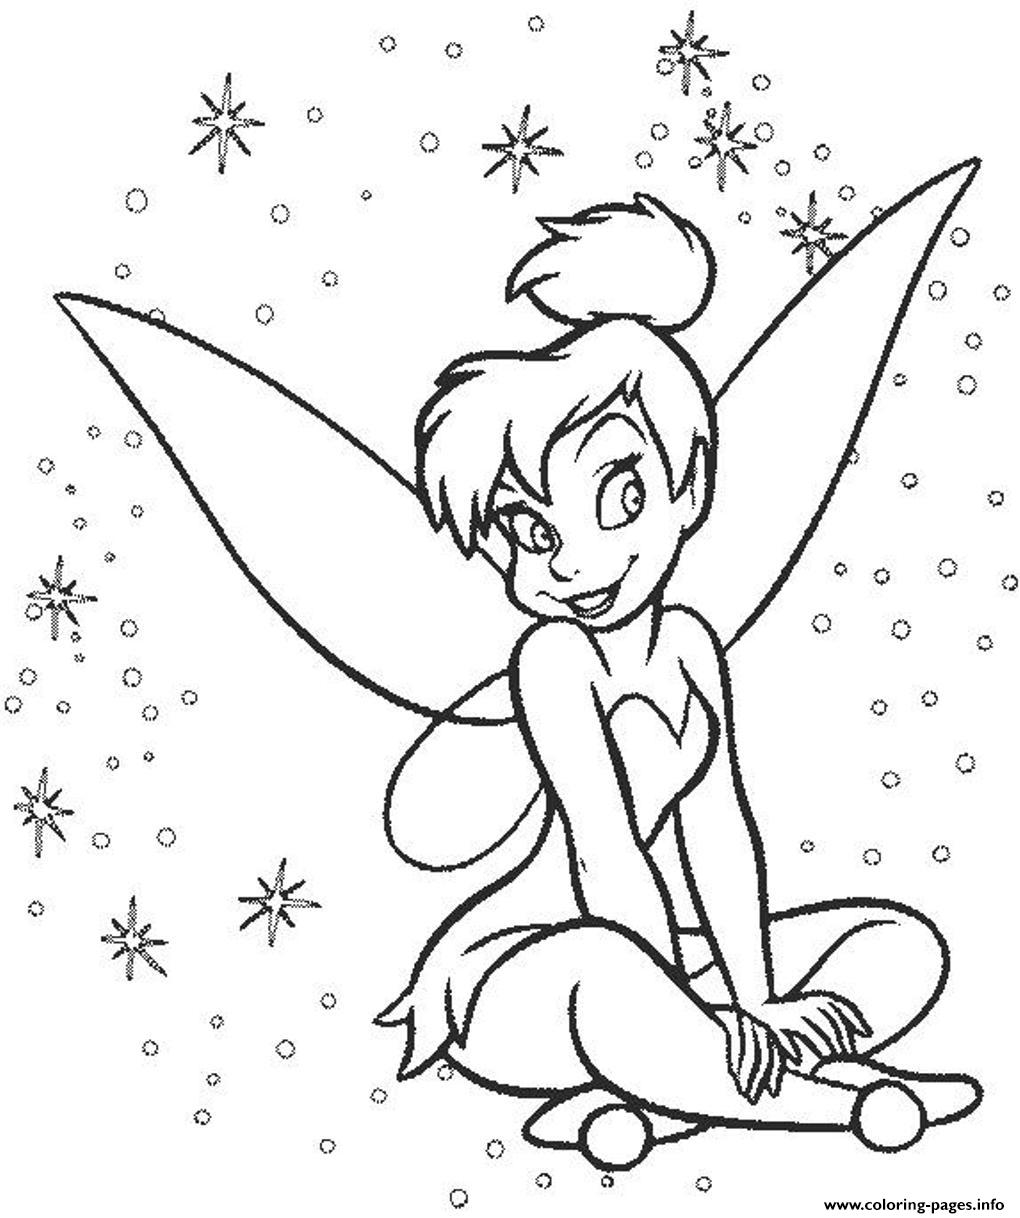 Tinkerbell S Kidsd054 coloring